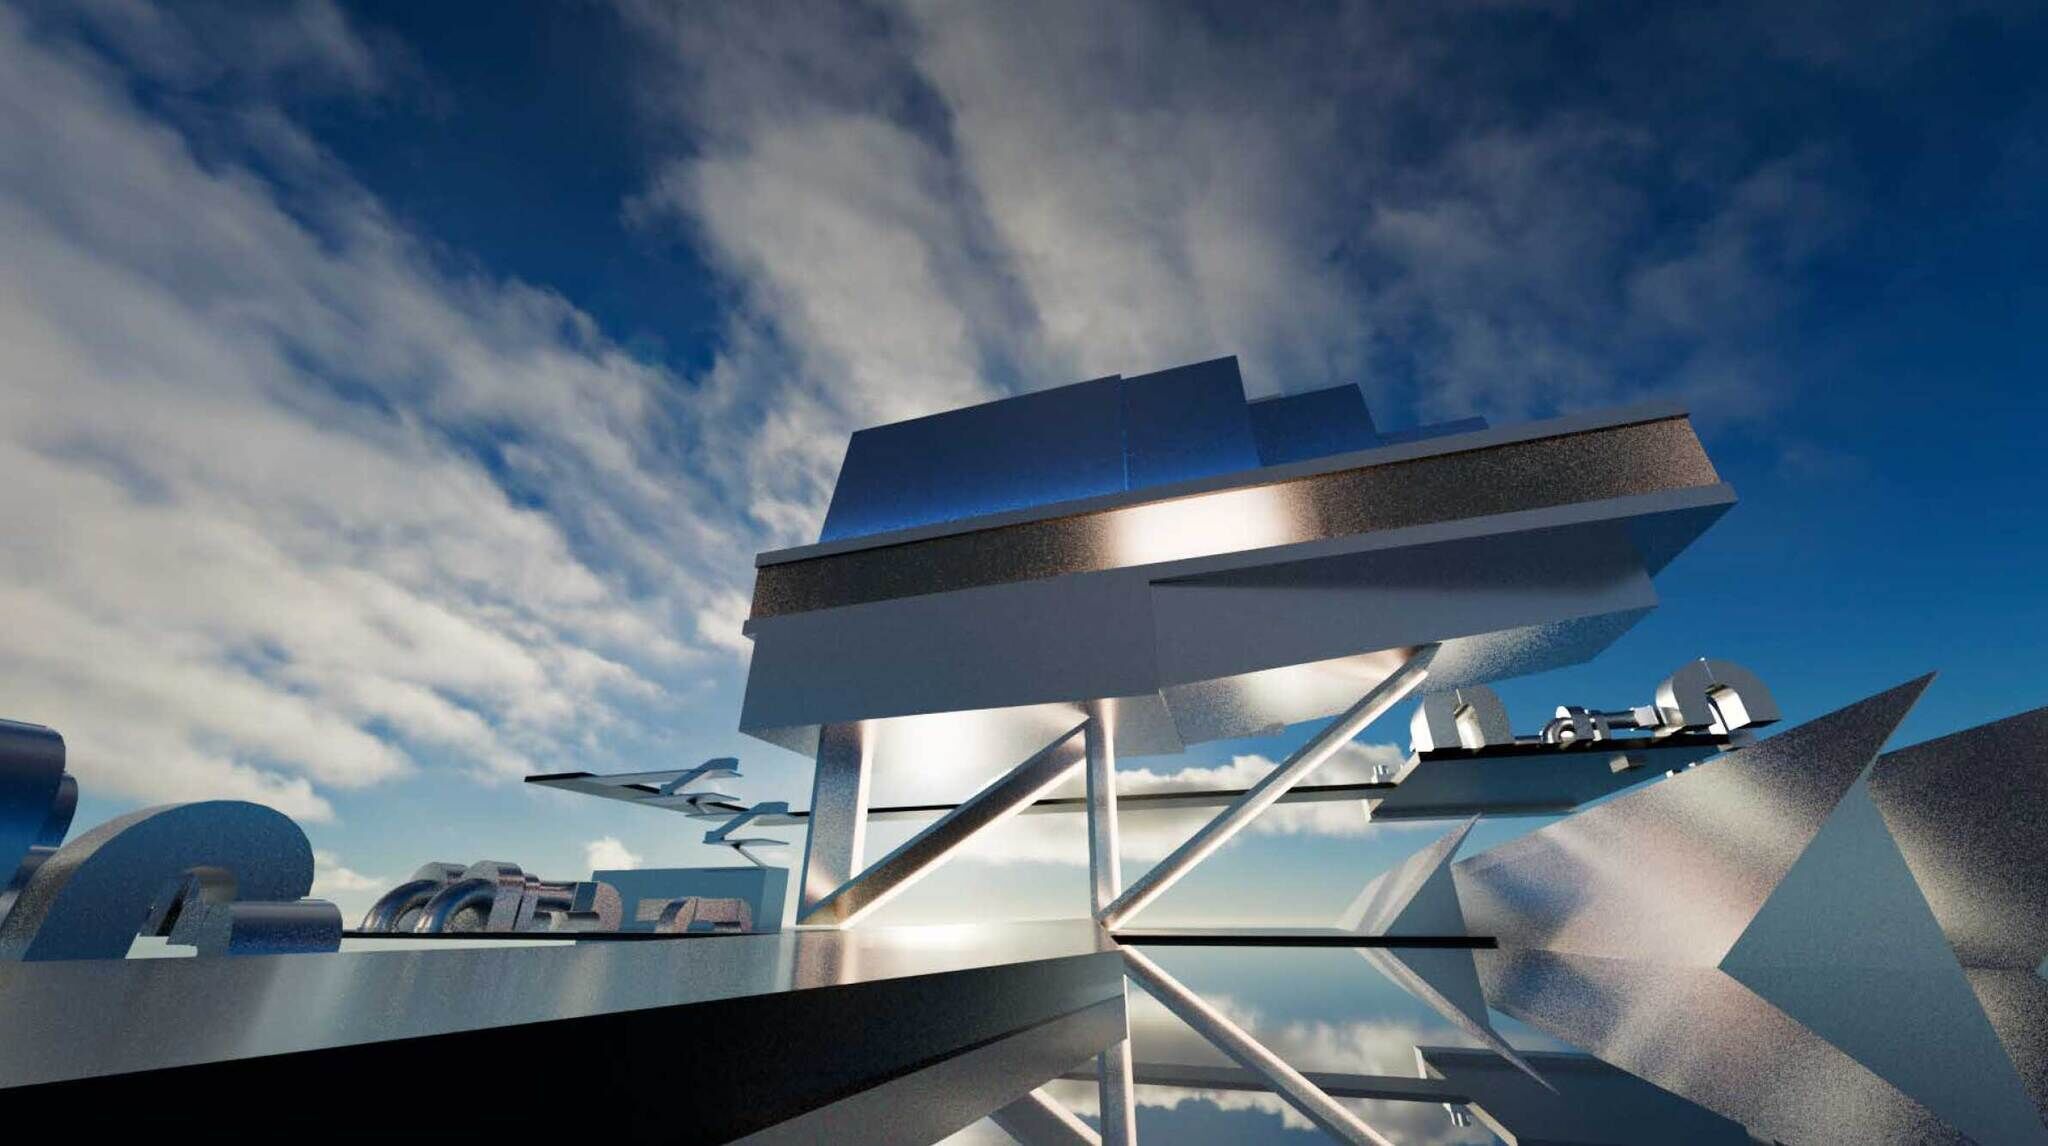 A silver, metallic 3D-generated structure reminiscent of the Whitney's building. In the image, you can see the building's exterior as well as a blue sky. 